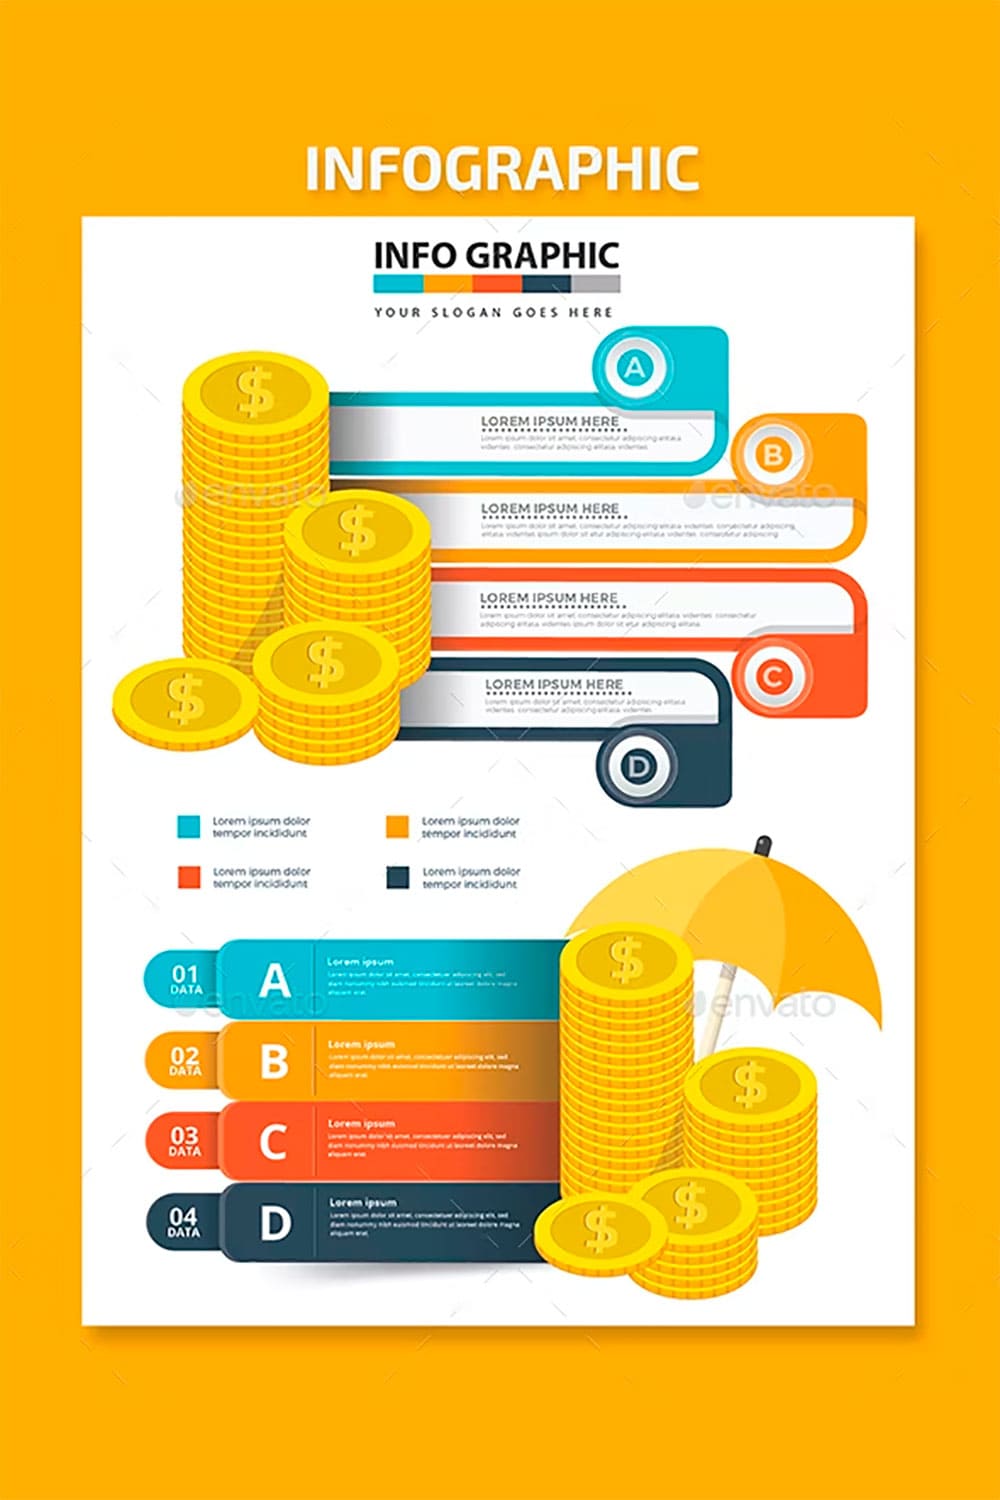 Infographics design in the yellow, picture for pinterest.